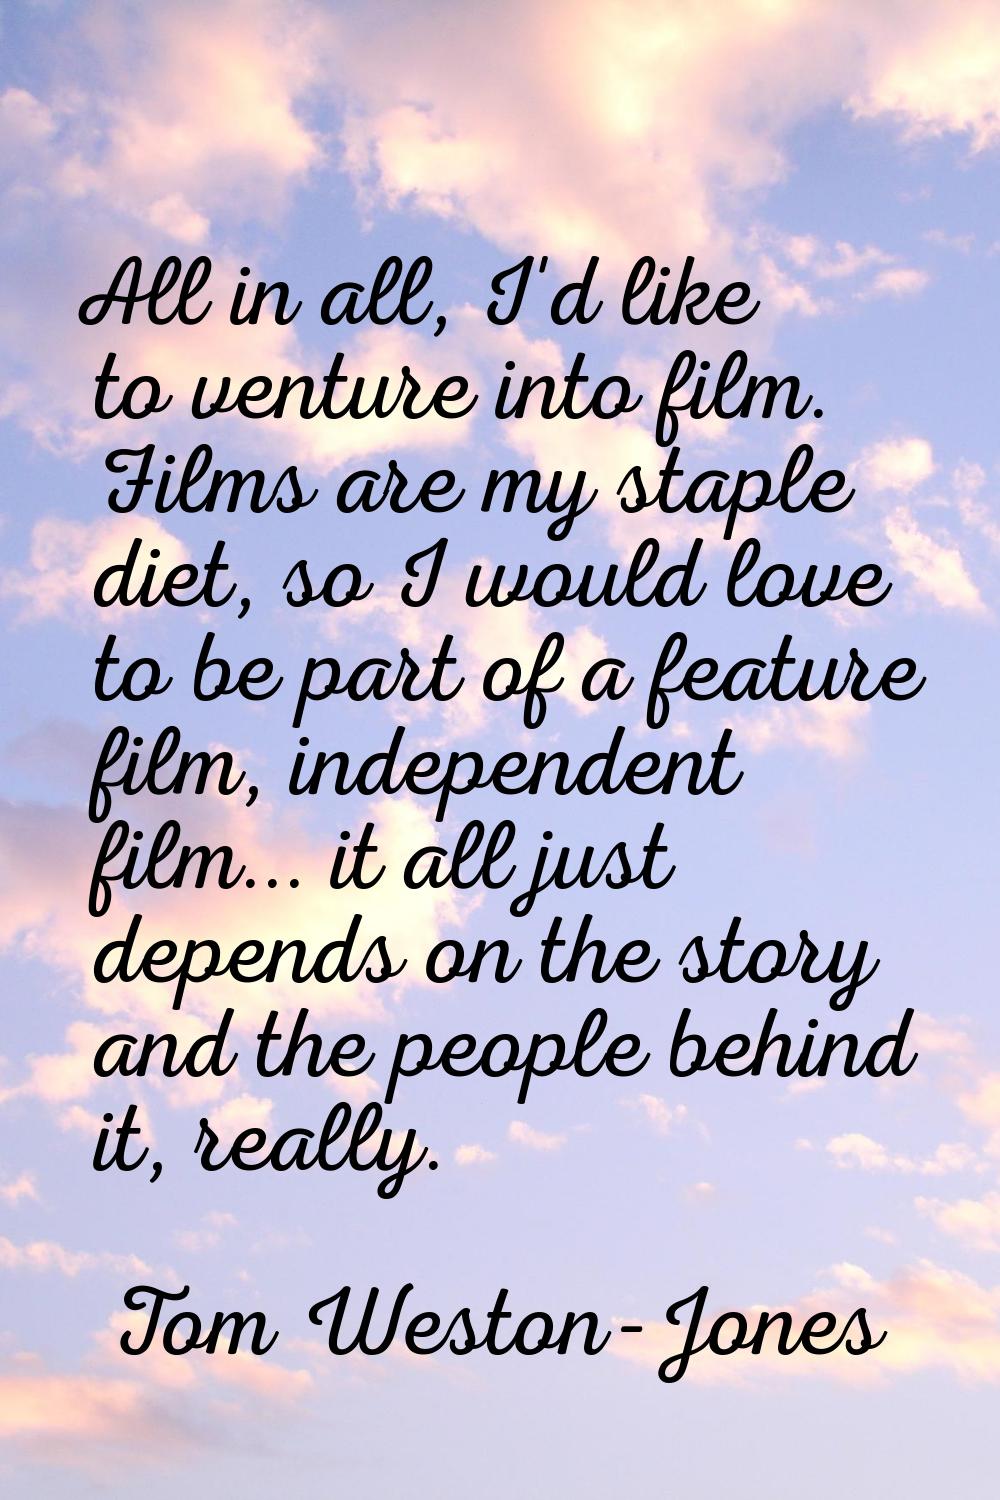 All in all, I'd like to venture into film. Films are my staple diet, so I would love to be part of 